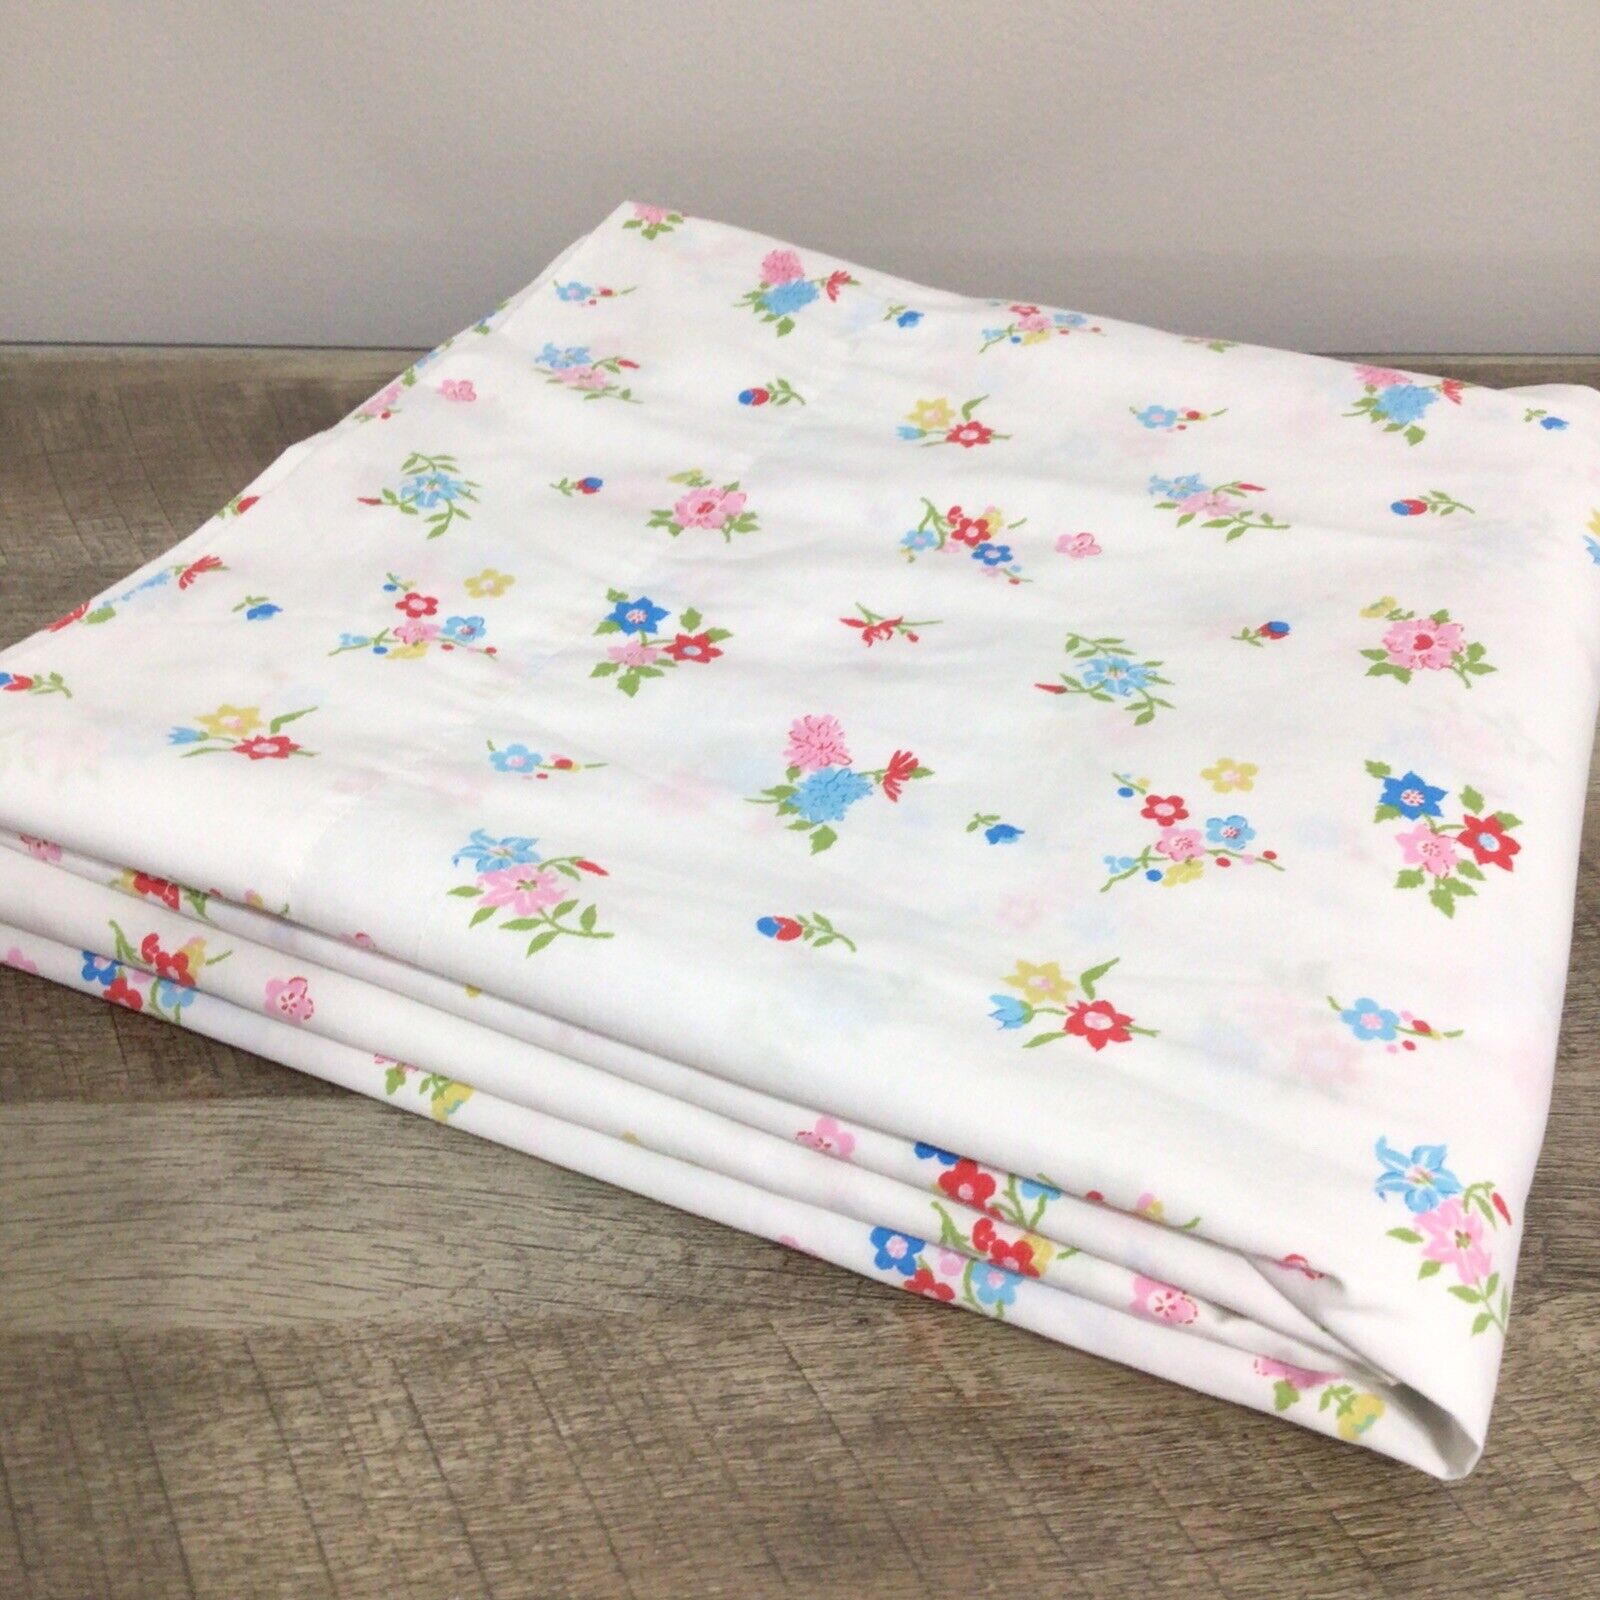 Vintage Pacific MIRACALE Percale Queen Flat Sheet Floral Flower